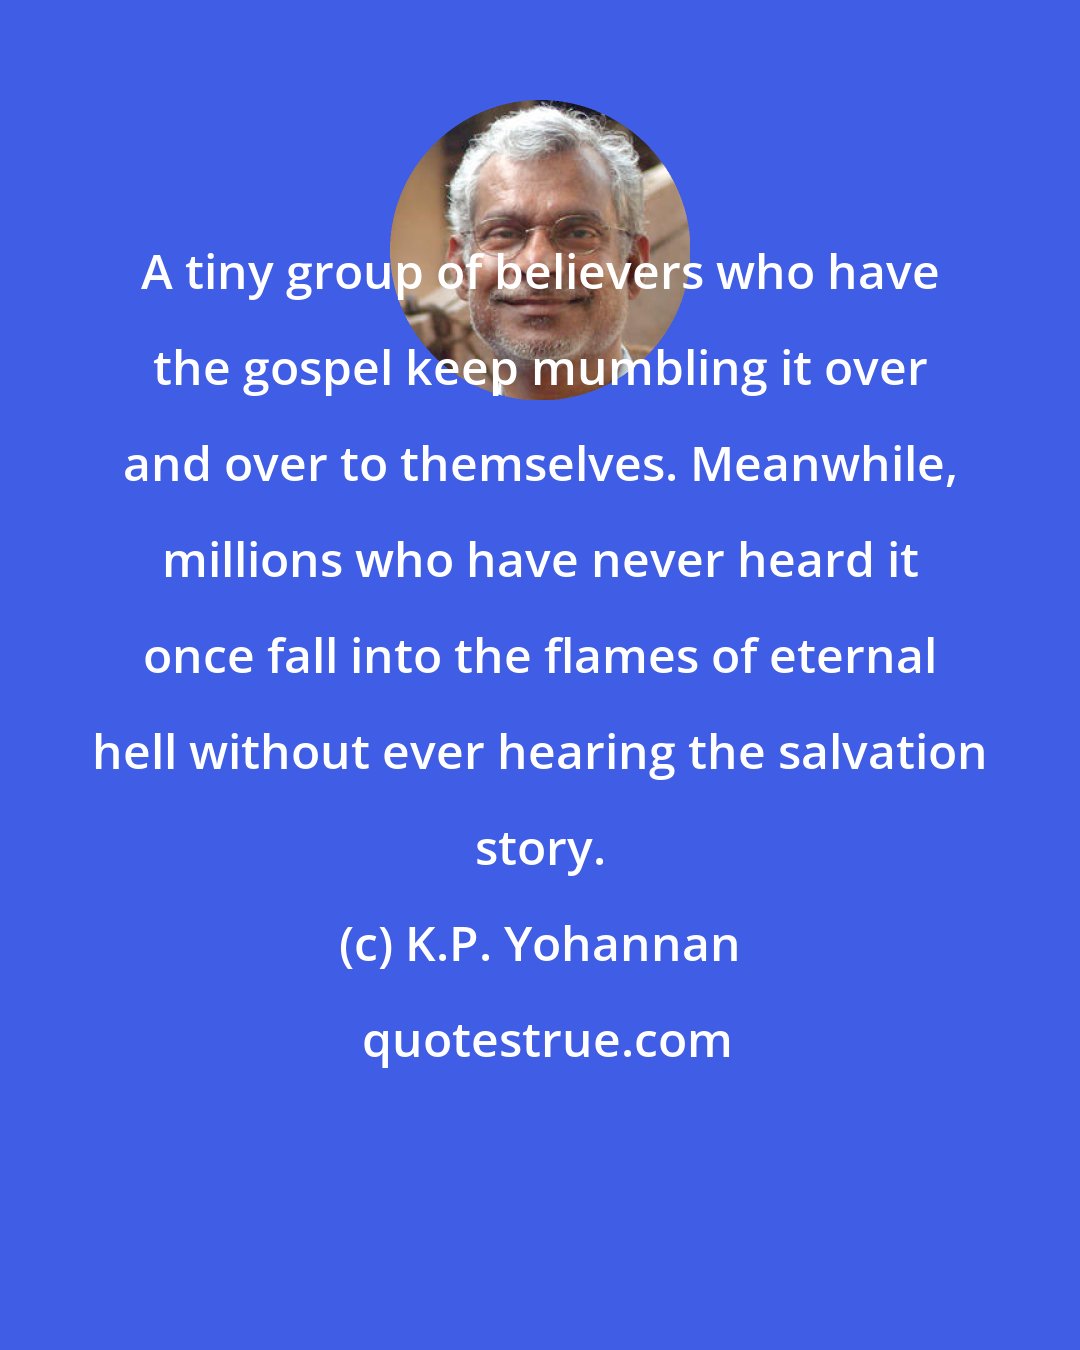 K.P. Yohannan: A tiny group of believers who have the gospel keep mumbling it over and over to themselves. Meanwhile, millions who have never heard it once fall into the flames of eternal hell without ever hearing the salvation story.